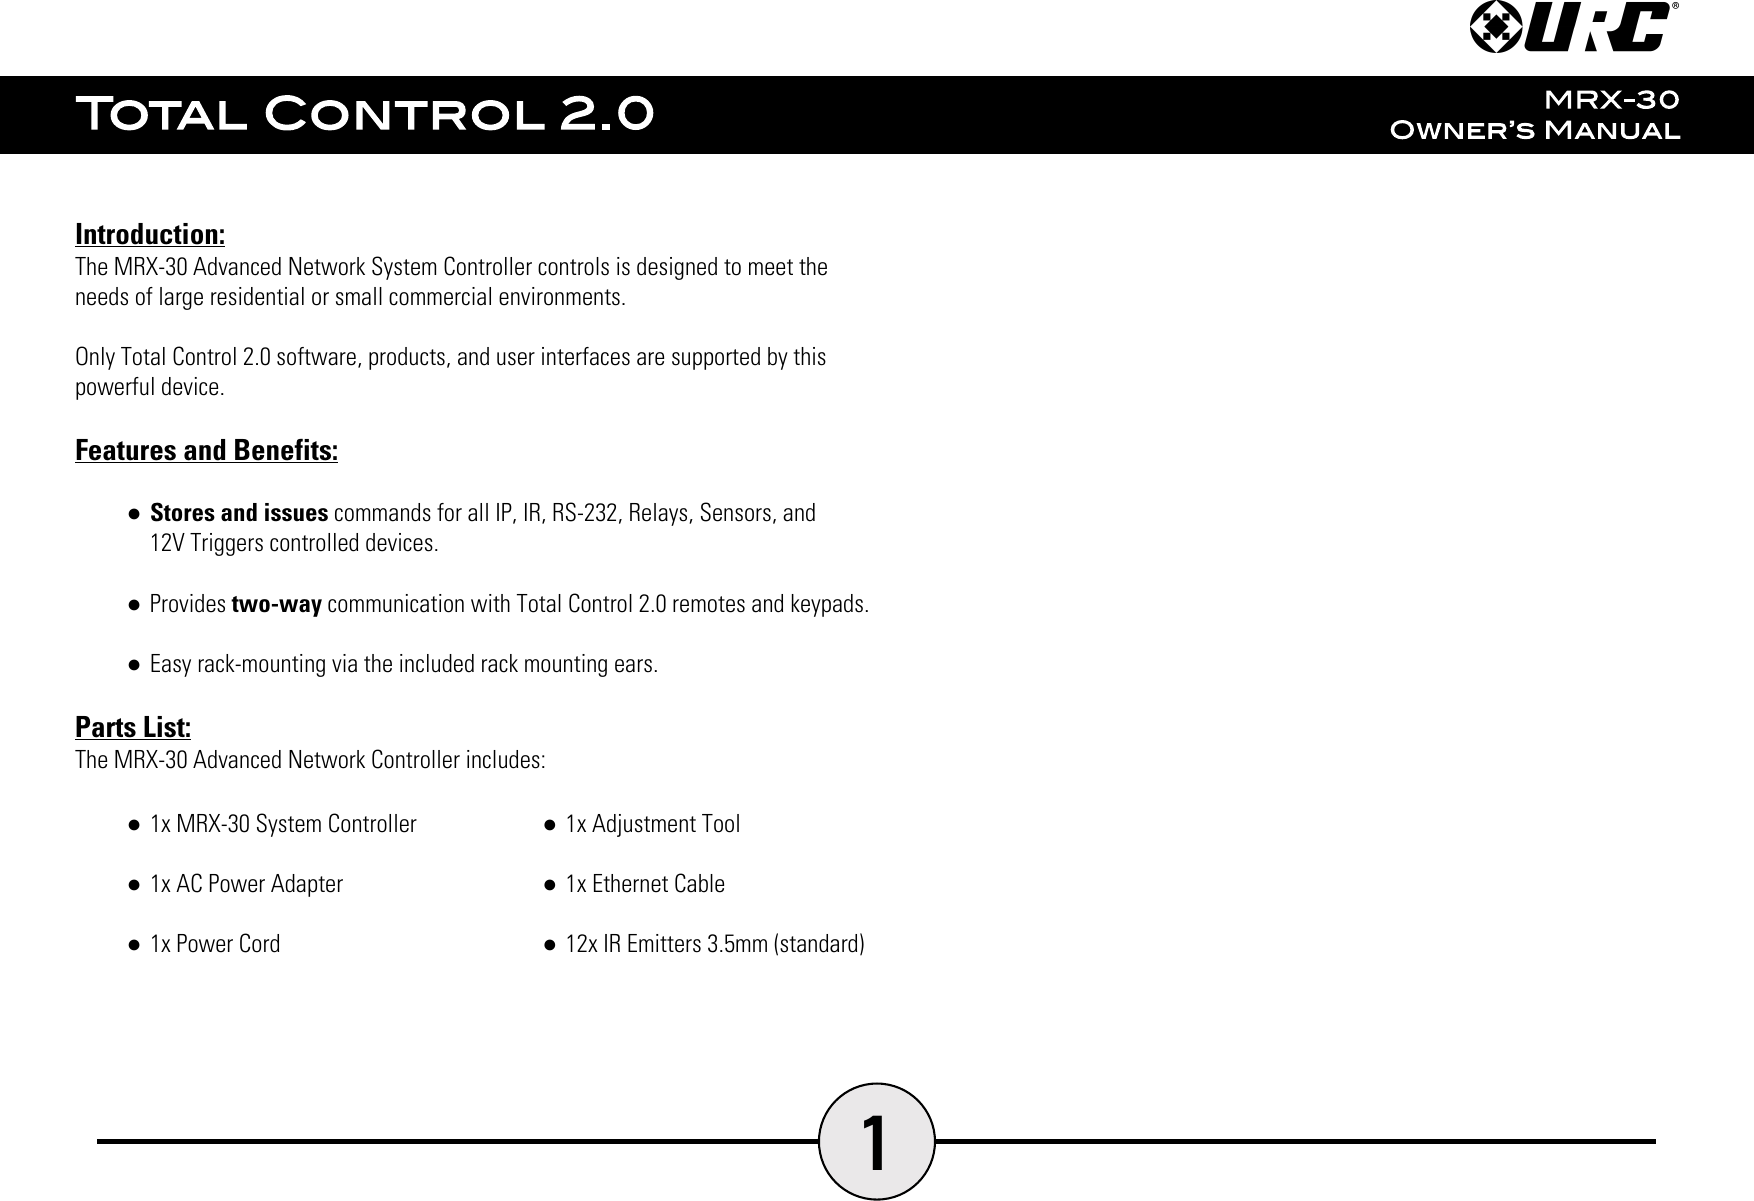 1Introduction:The MRX-30 Advanced Network System Controller controls is designed to meet theneeds of large residential or small commercial environments.Only Total Control 2.0 software, products, and user interfaces are supported by thispowerful device.Features and Benefits:●Stores and issues commands for all IP, IR, RS-232, Relays, Sensors, and12V Triggers controlled devices.●Provides two-way communication with Total Control 2.0 remotes and keypads.●Easy rack-mounting via the included rack mounting ears.Parts List:The MRX-30 Advanced Network Controller includes:●1x MRX-30 System Controller●1x AC Power Adapter●1x Power Cord●1x Adjustment Tool●1x Ethernet Cable●12x IR Emitters 3.5mm (standard)